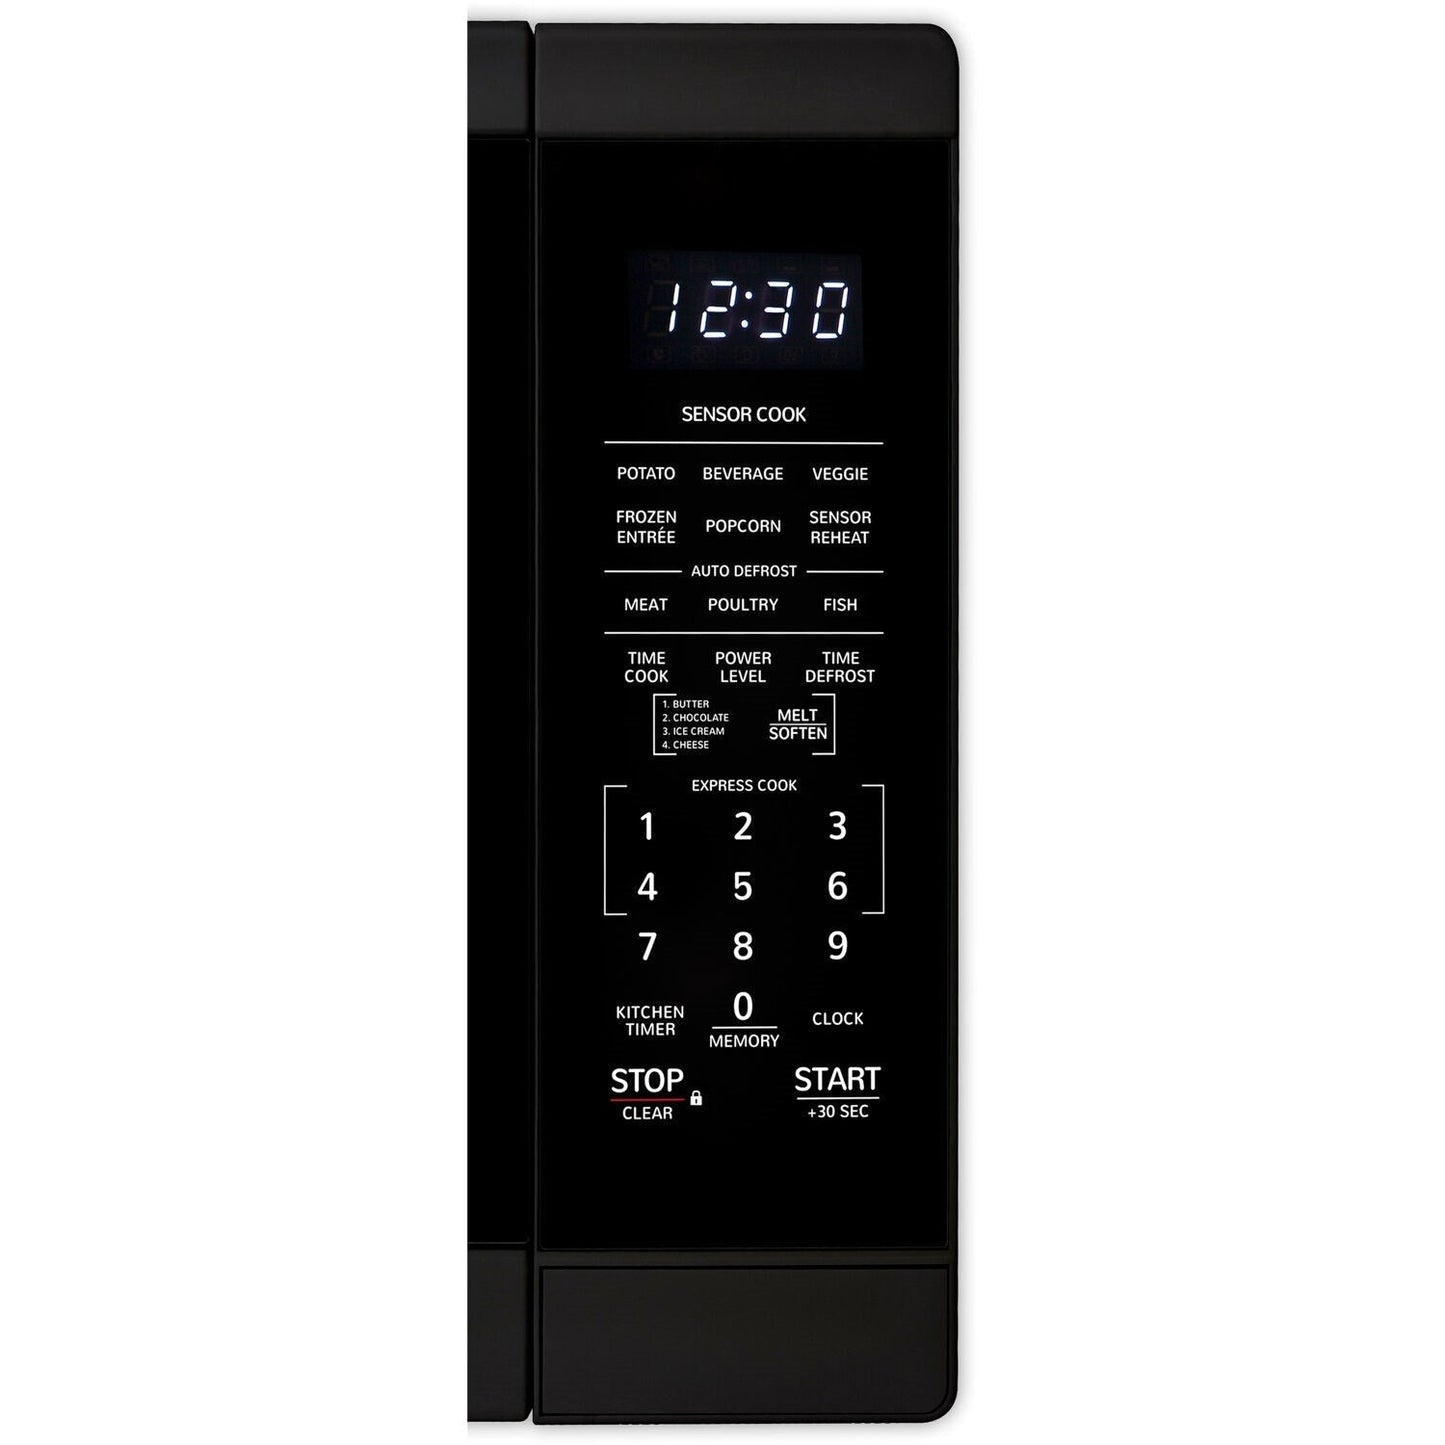 Sharp Carousel 20" 1.4 CU. Ft. 1100W Black Countertop Auto-Touch Control Panel Microwave Oven